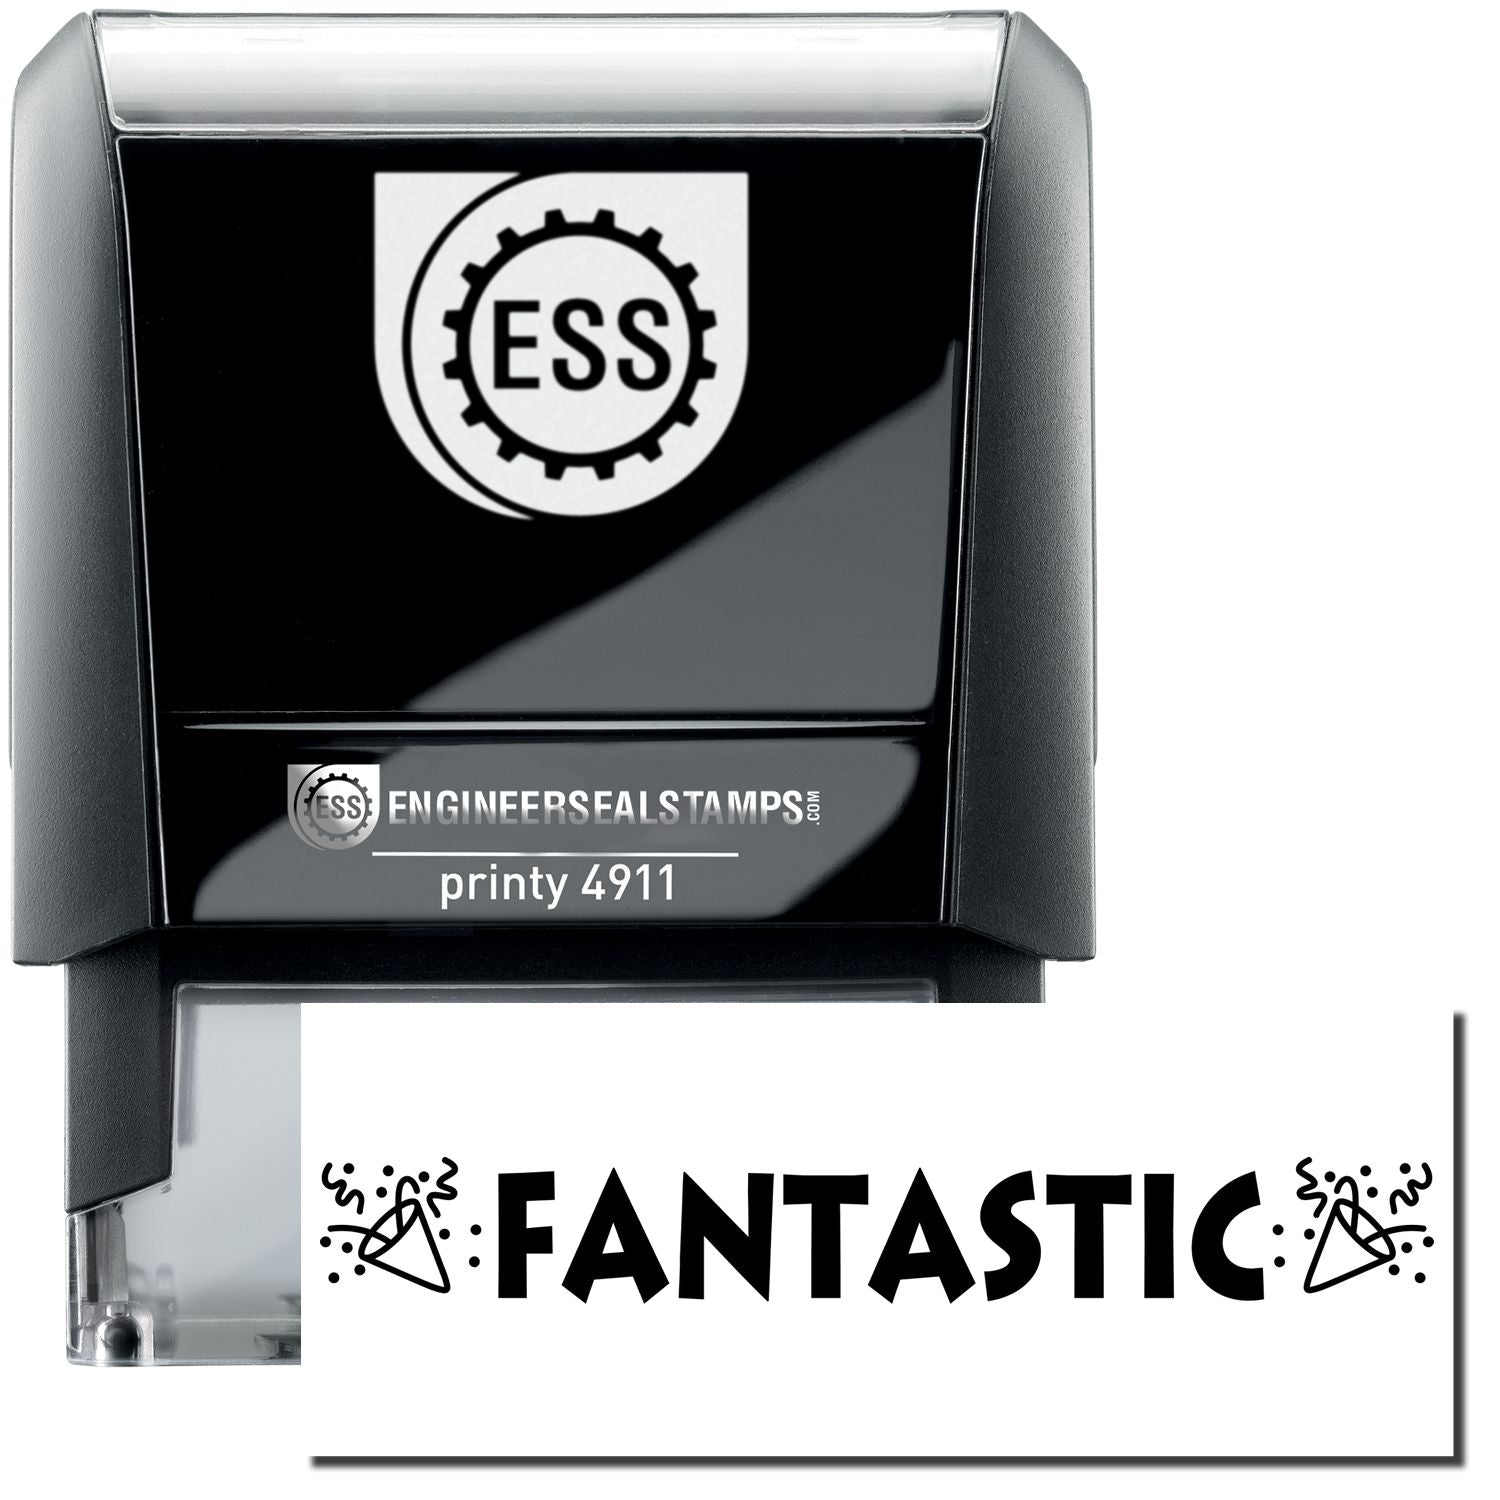 A self-inking stamp with a stamped image showing how the text "FANTASTIC" (in jagged letters and bold font with images of noise blowers on each side) is displayed after stamping.